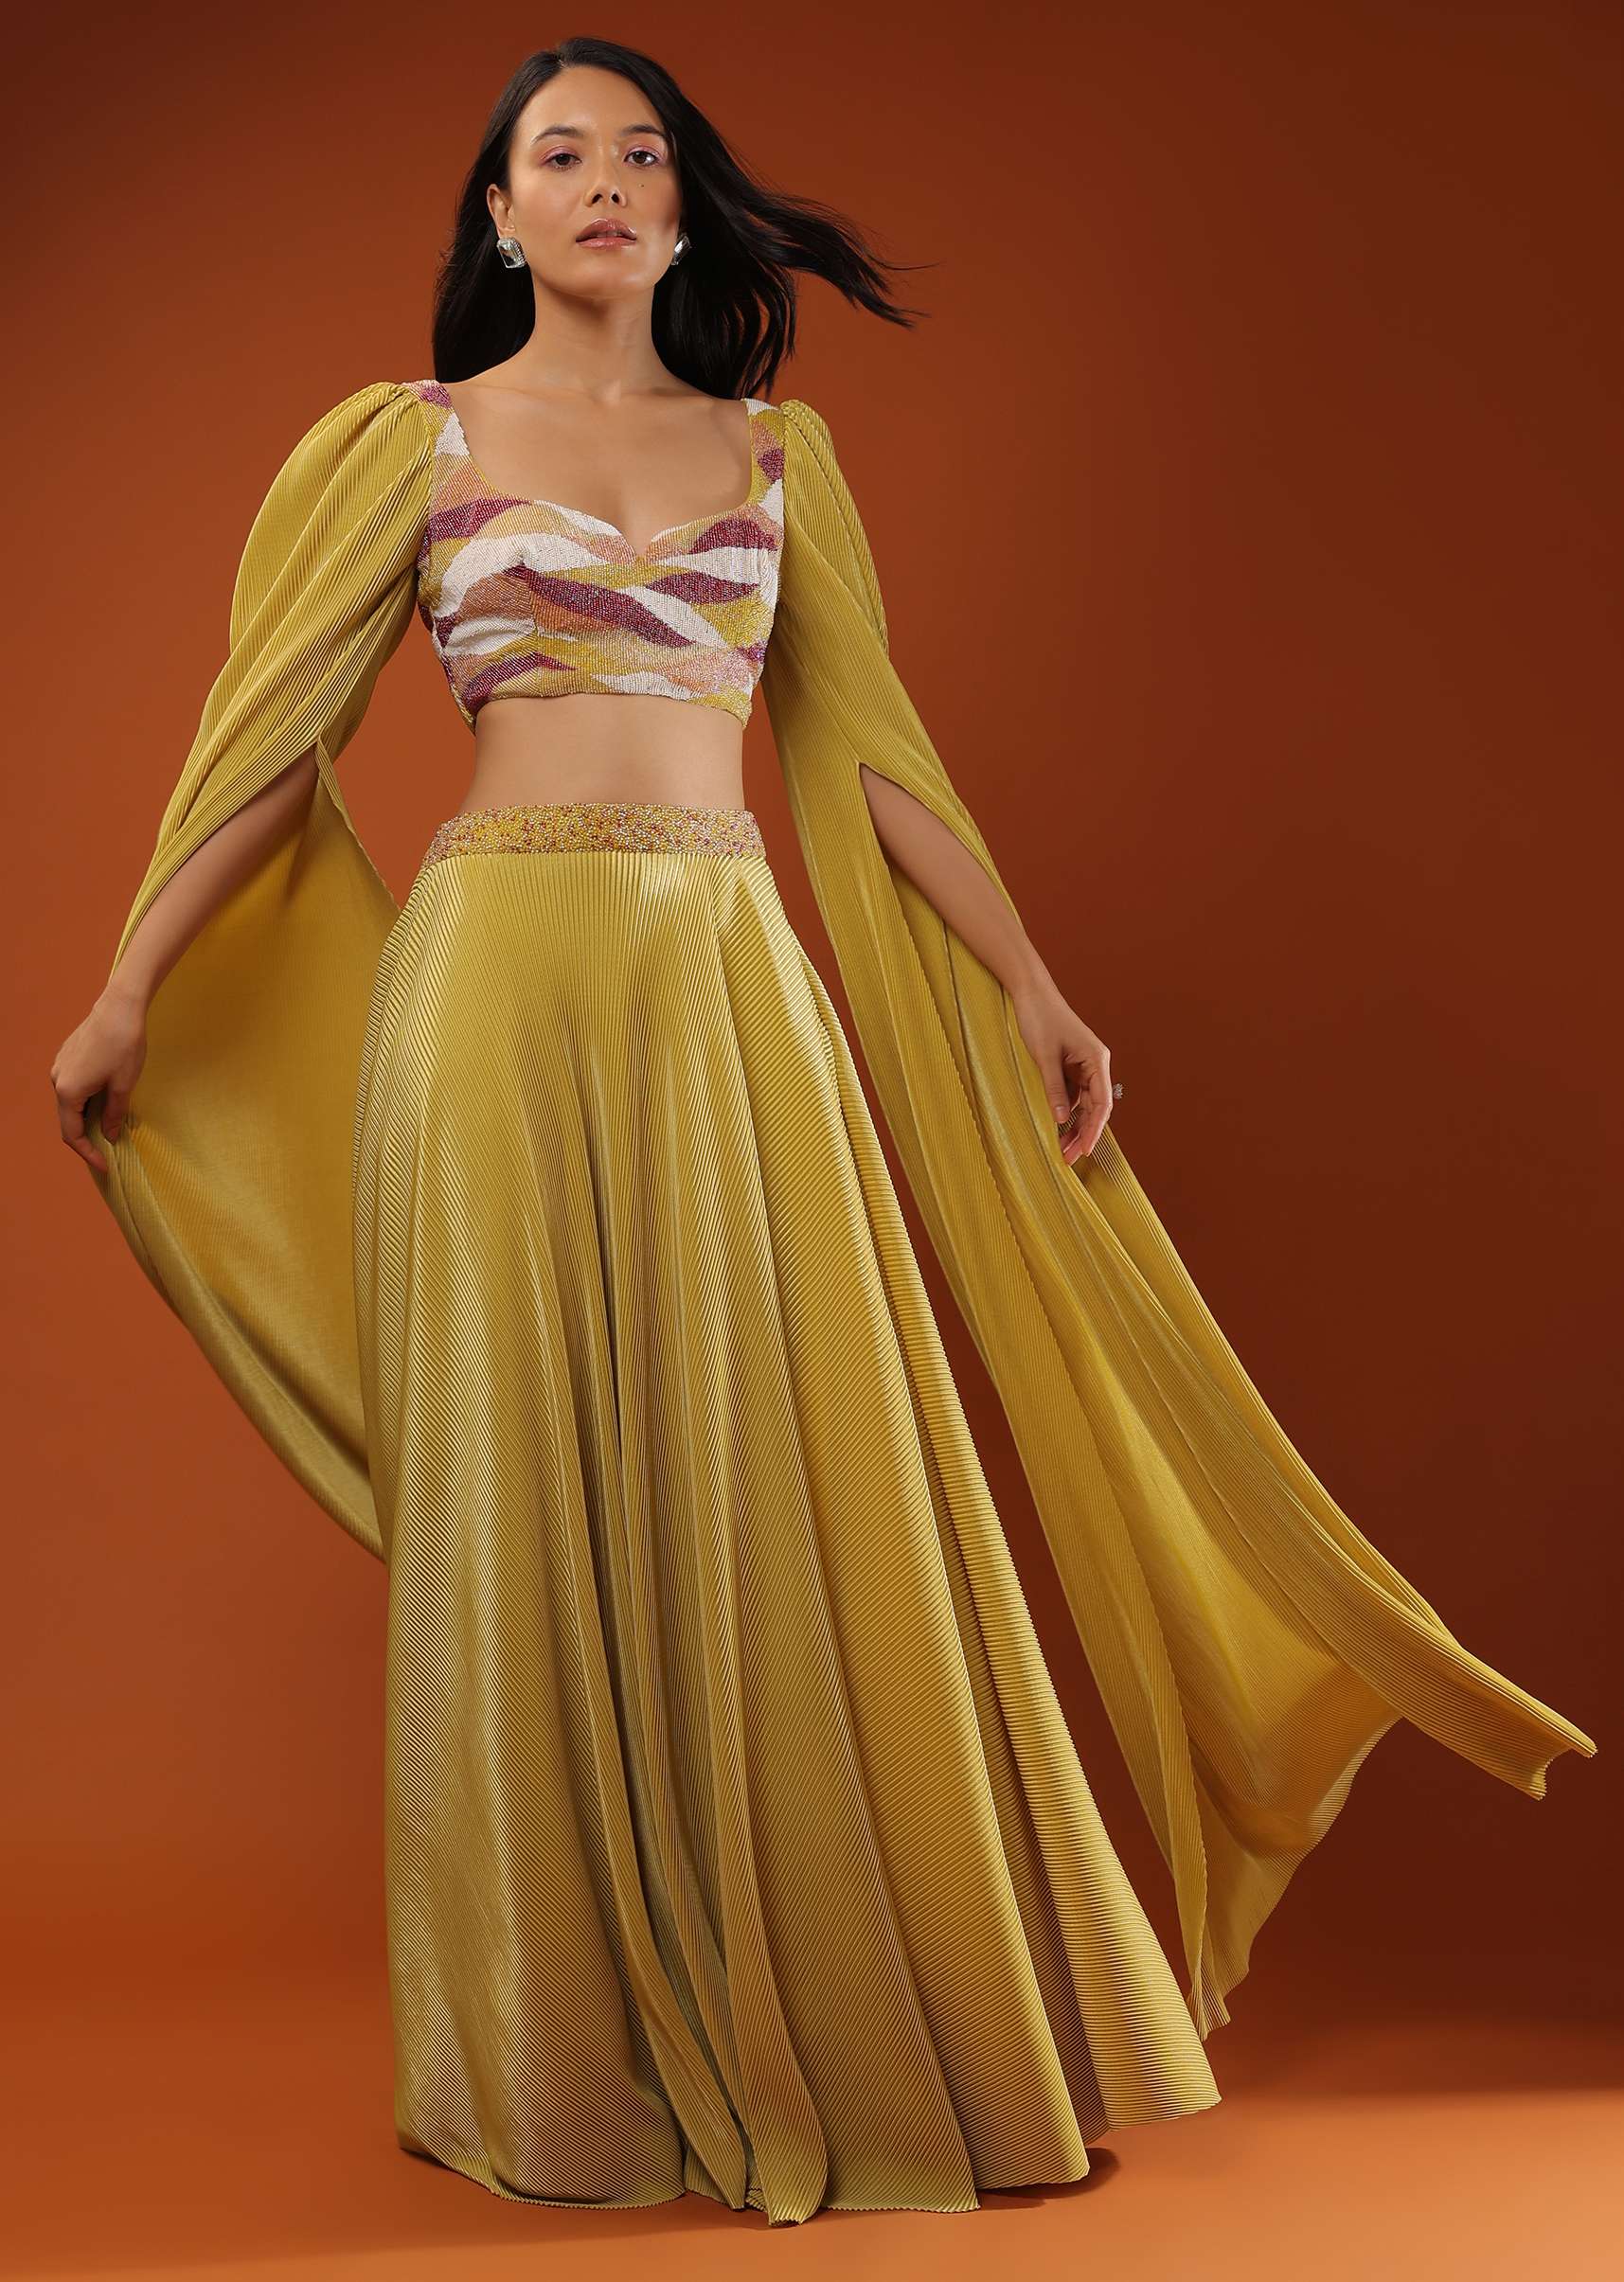 Mustard Yellow Lehenga And Crop Top In Long Cape Sleeves, Crafted In Crush With A Side Zip Closure